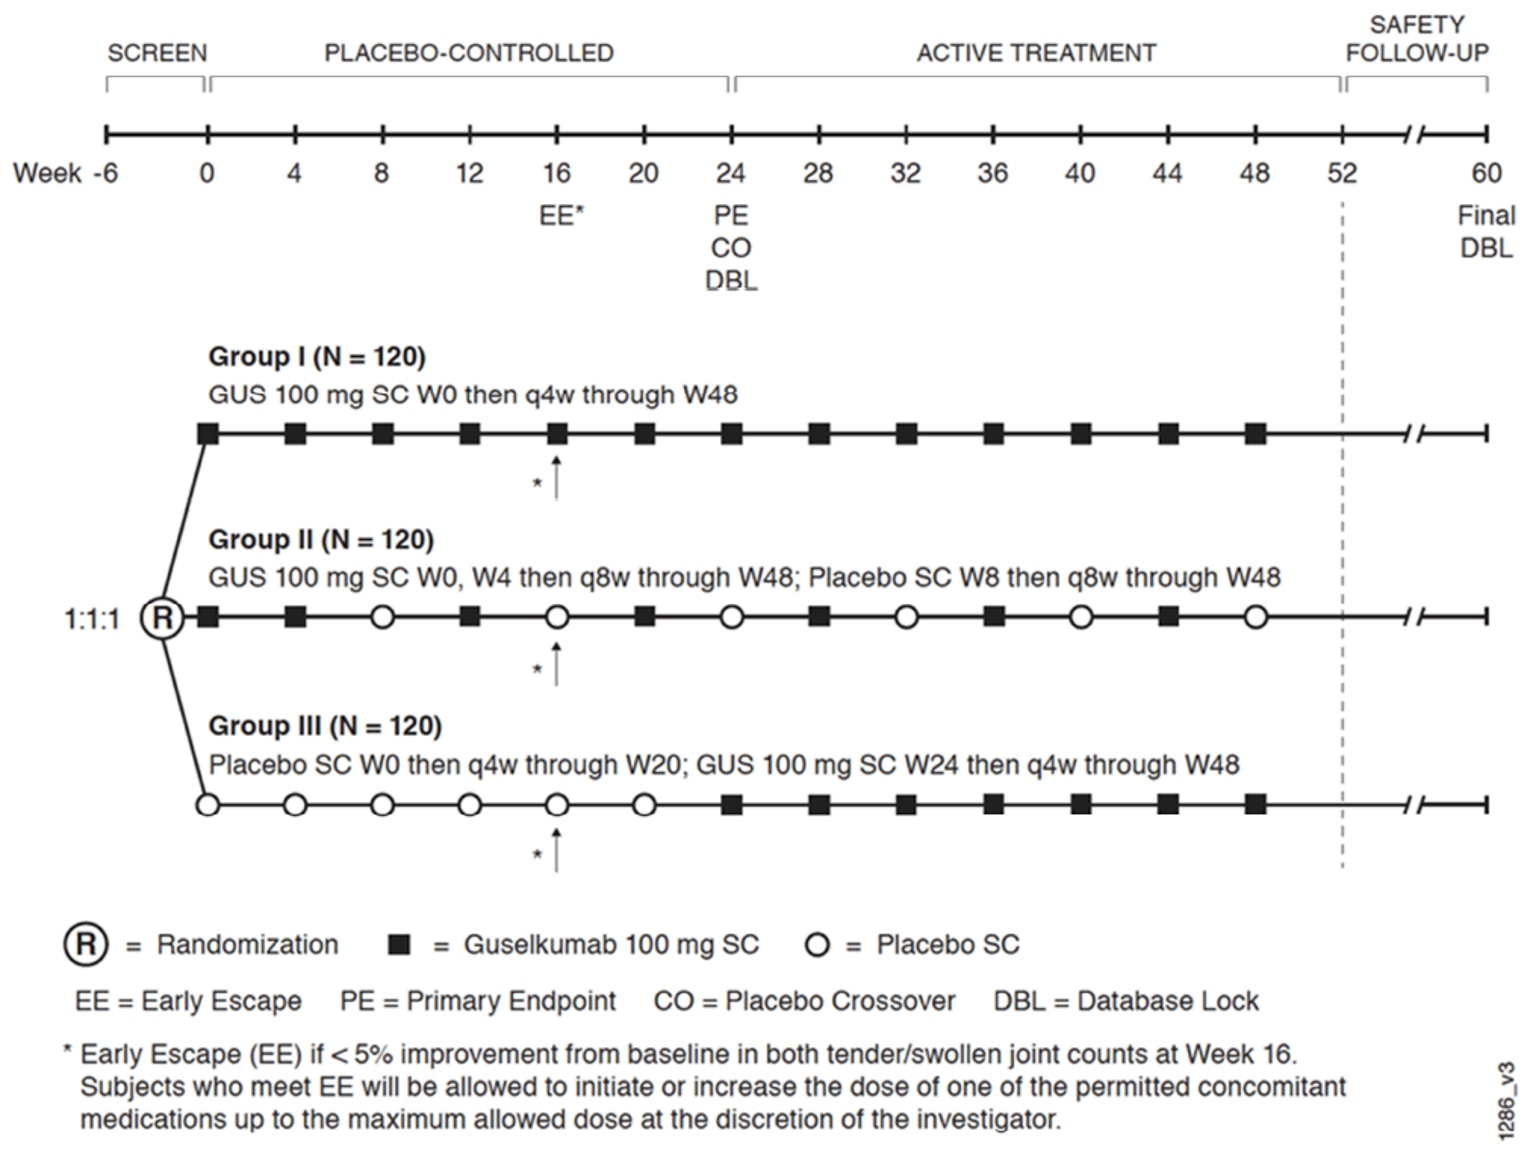 Patients were randomized to 3 treatment groups (guselkumab every 4 weeks, guselkumab every 8 weeks, or placebo), with the last dosing visit at 48 weeks. Patients were assessed for escape therapy at week 16.